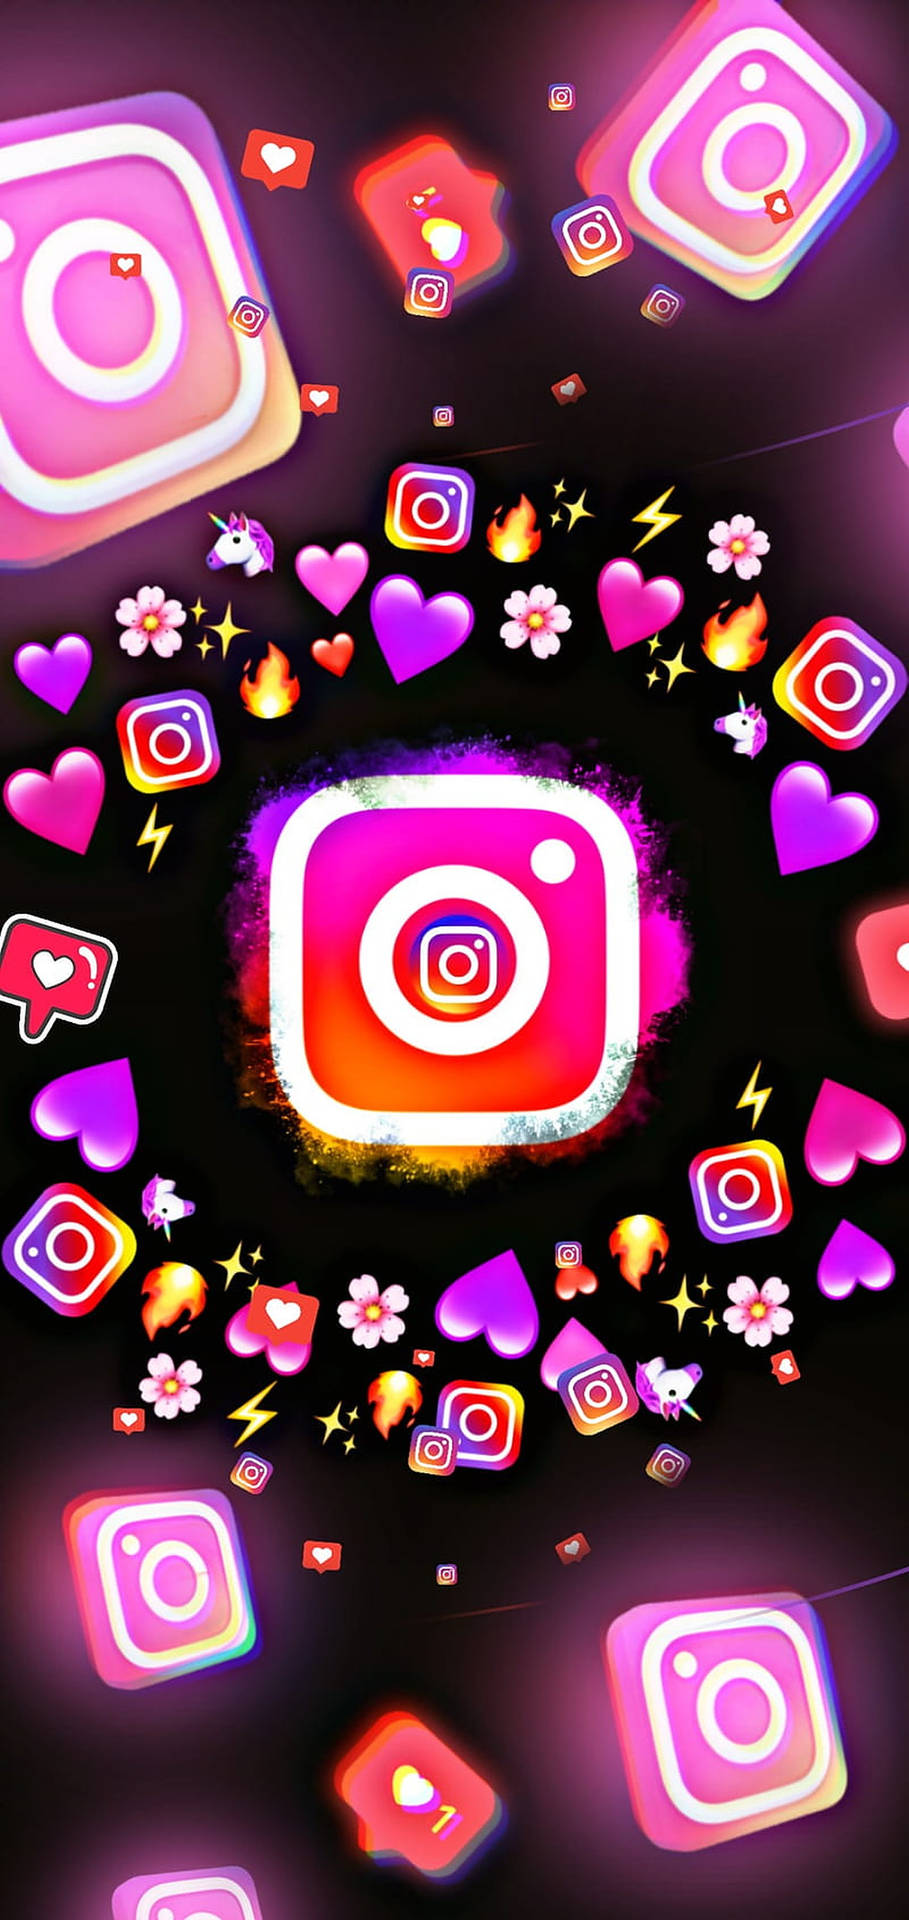 Instagram Icon And Emojis